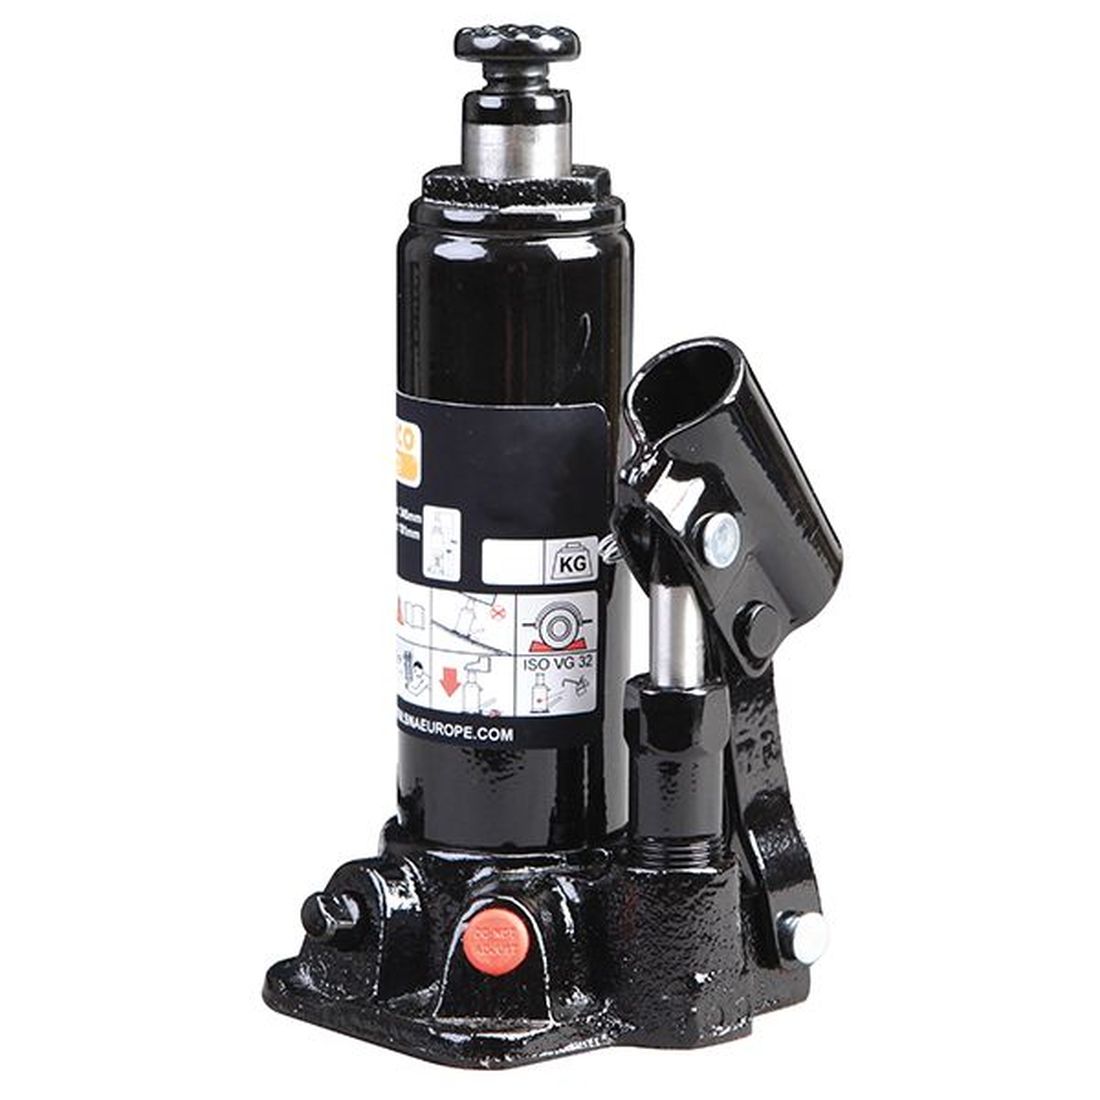 Bahco BH4S20 Bottle Jack 20T            